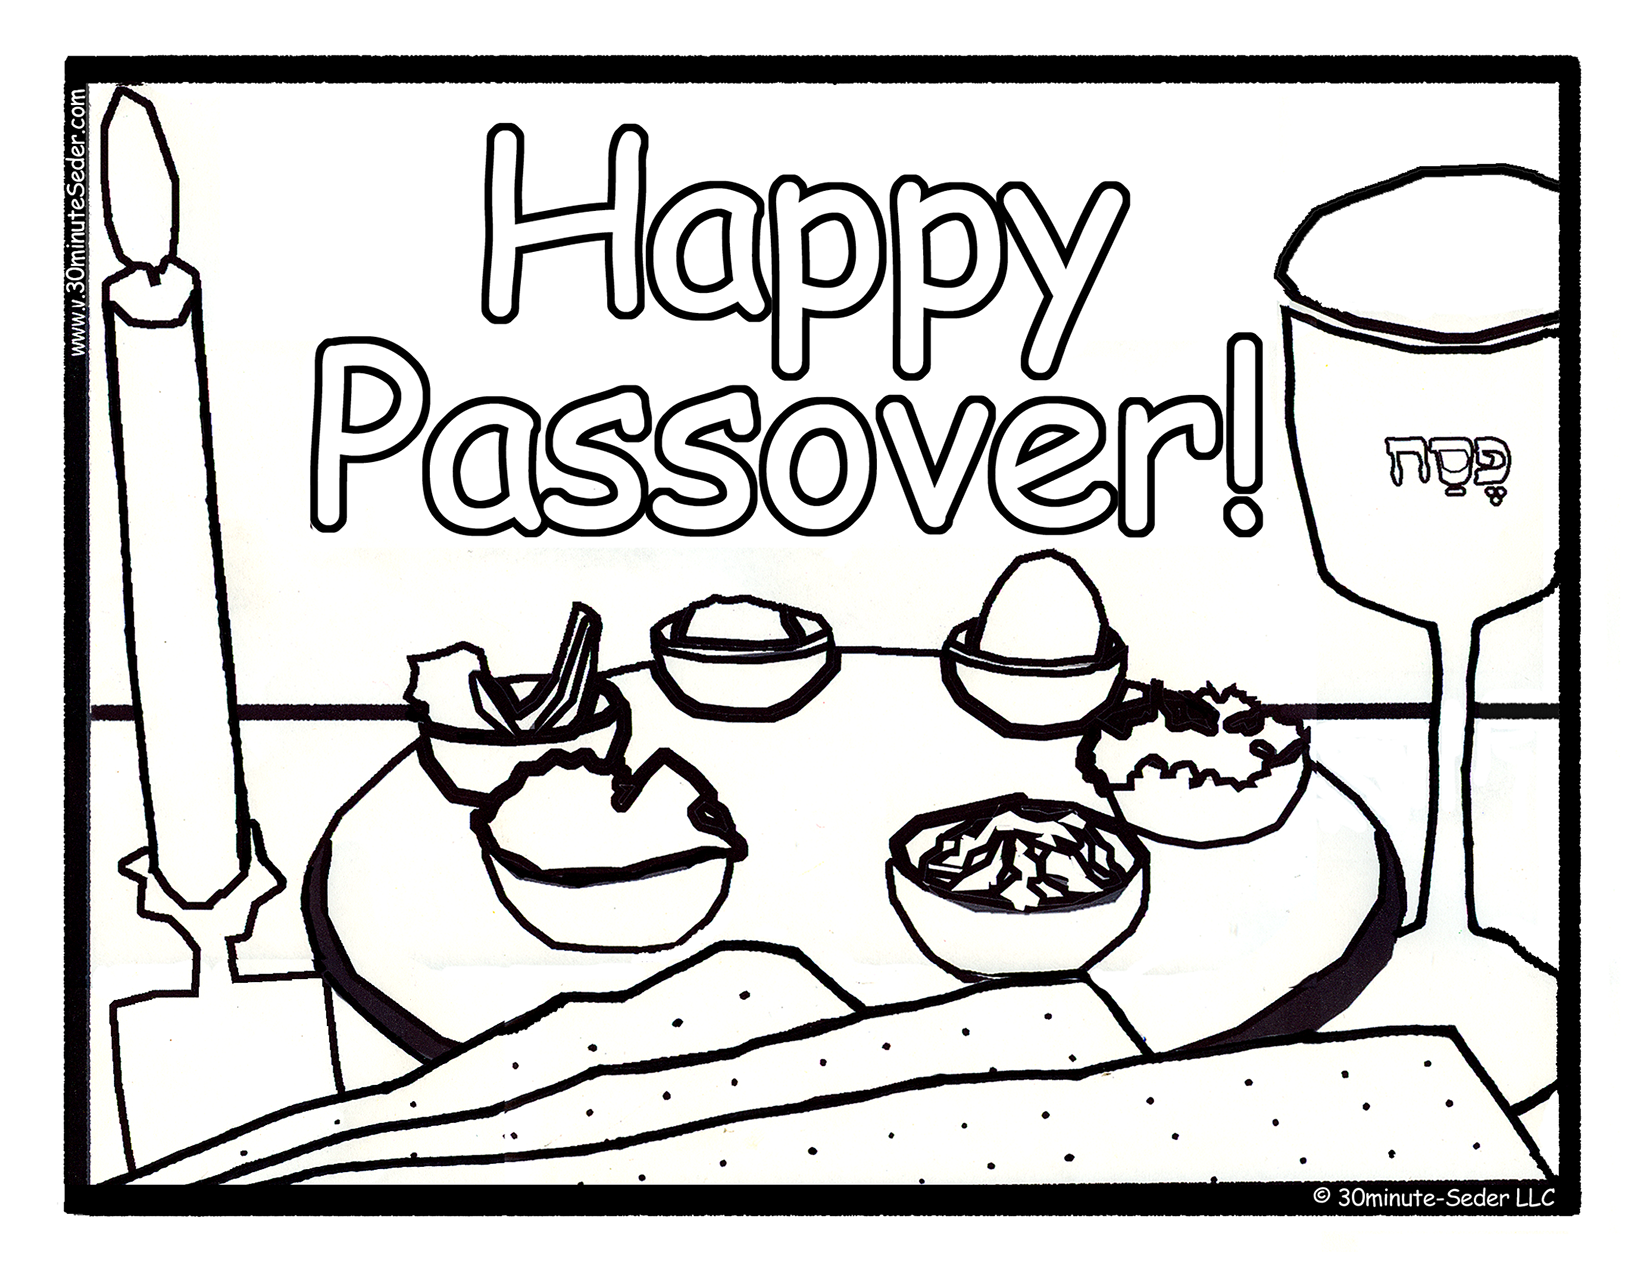 Passover coloring pages pdf download â minute seder